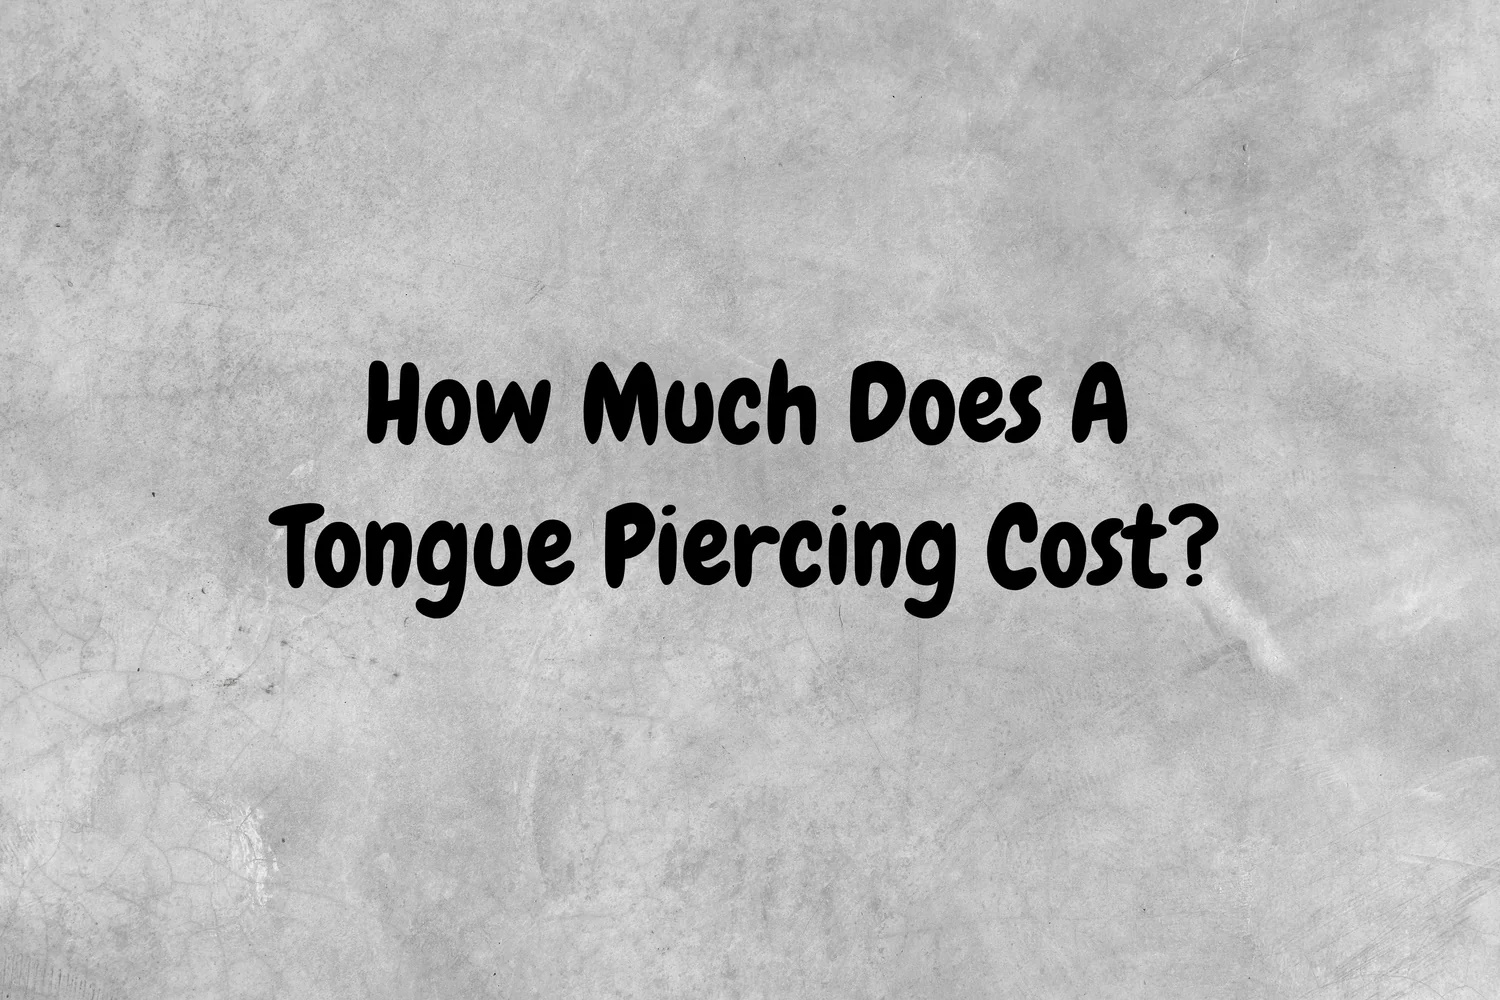 How Much Does A Tongue Piercing Cost?